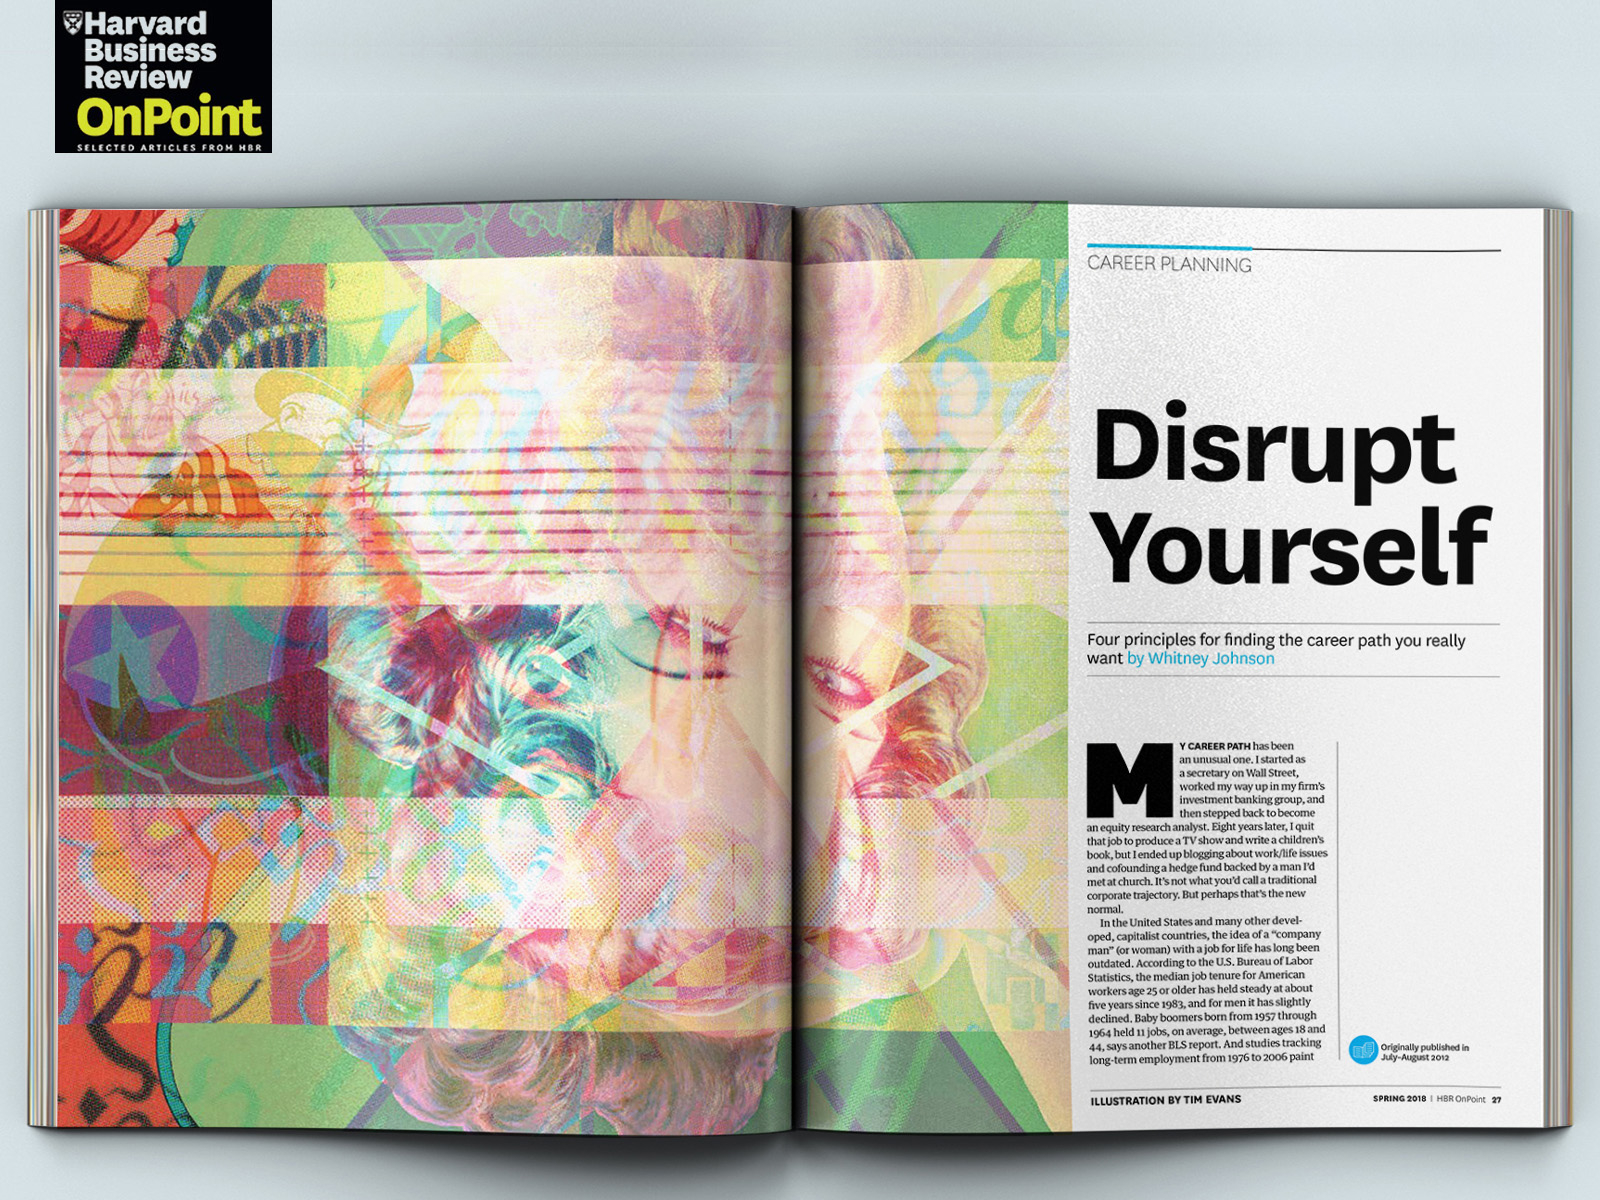 Harvard Business Review (OnPoint Magazine) by Tim Evans on Dribbble